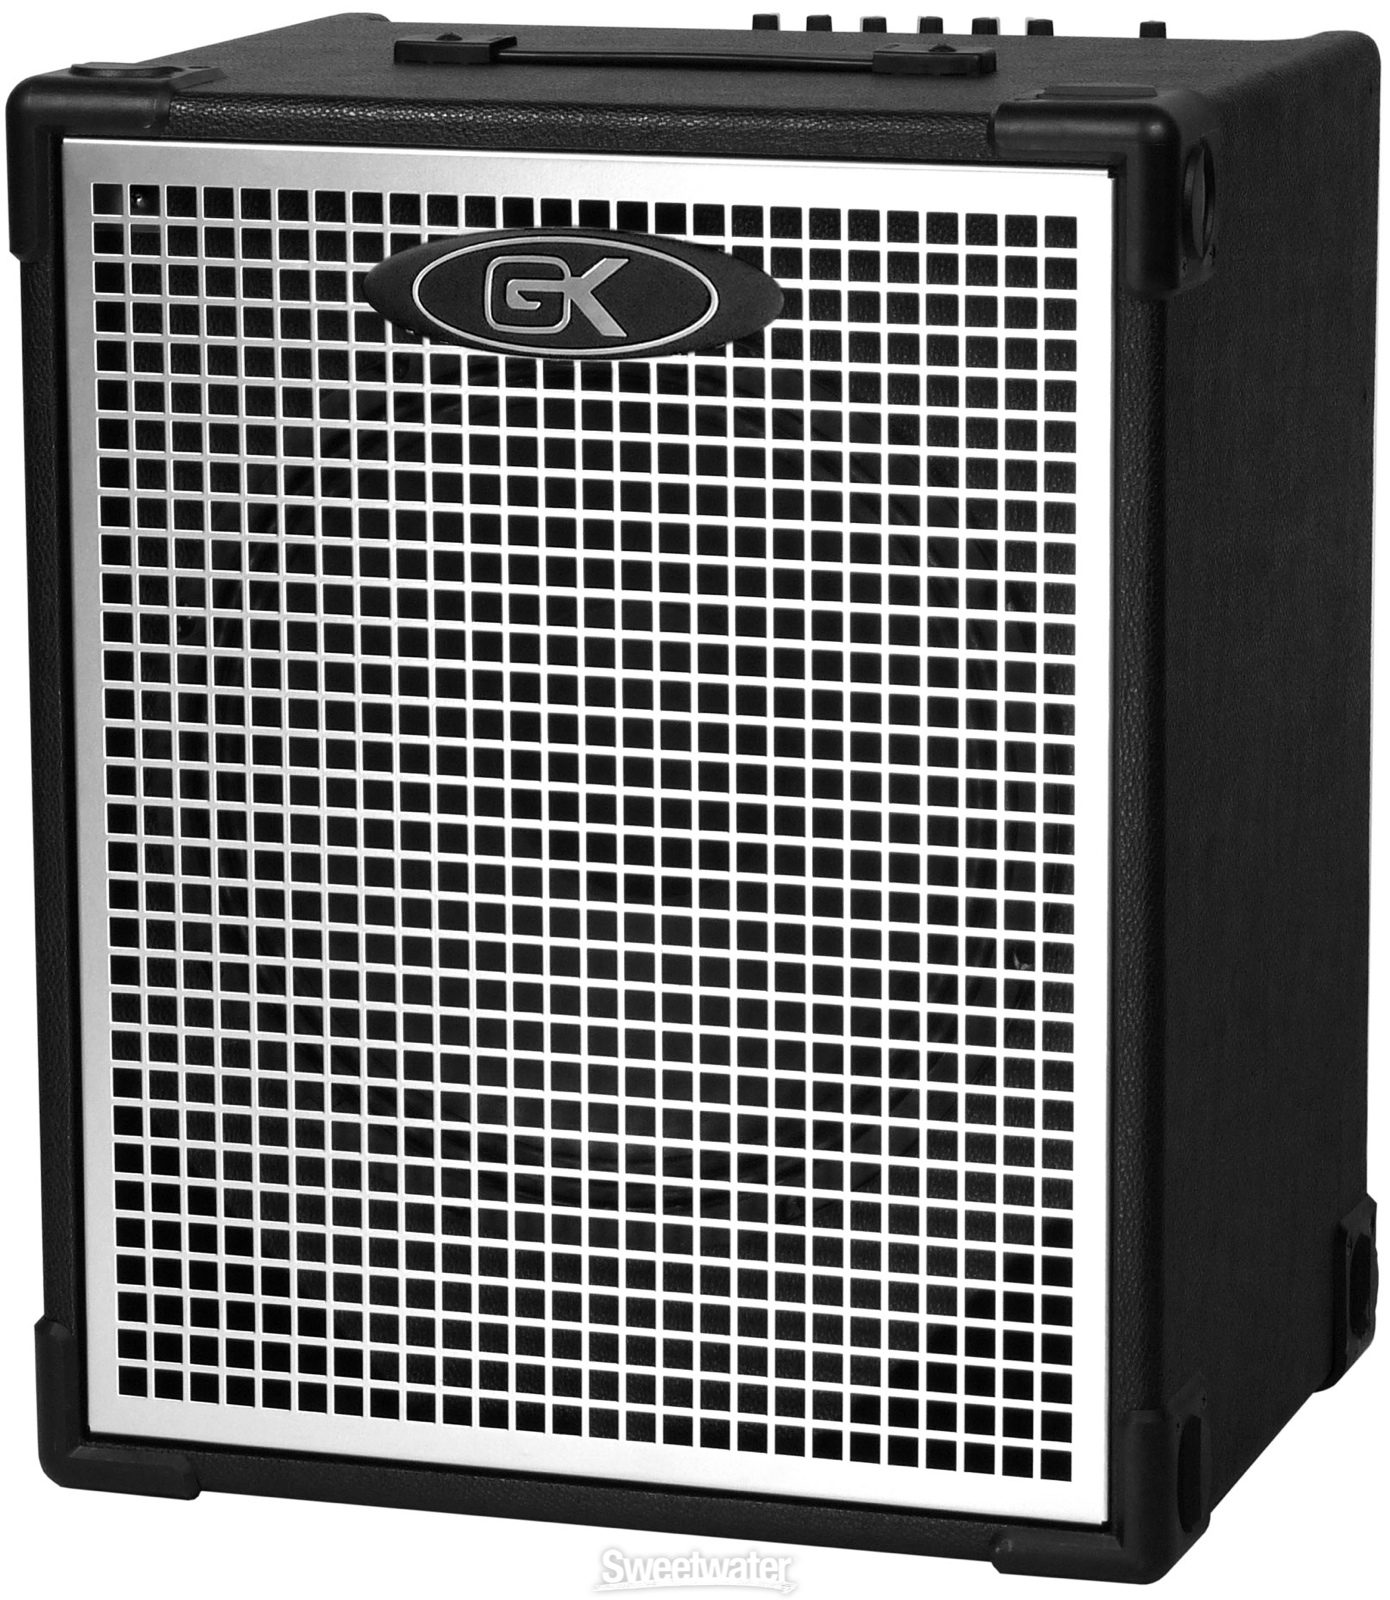 Kustom Groove Bass Amp.(Product News): An article from: Music Trades (Aug 1, 2005)